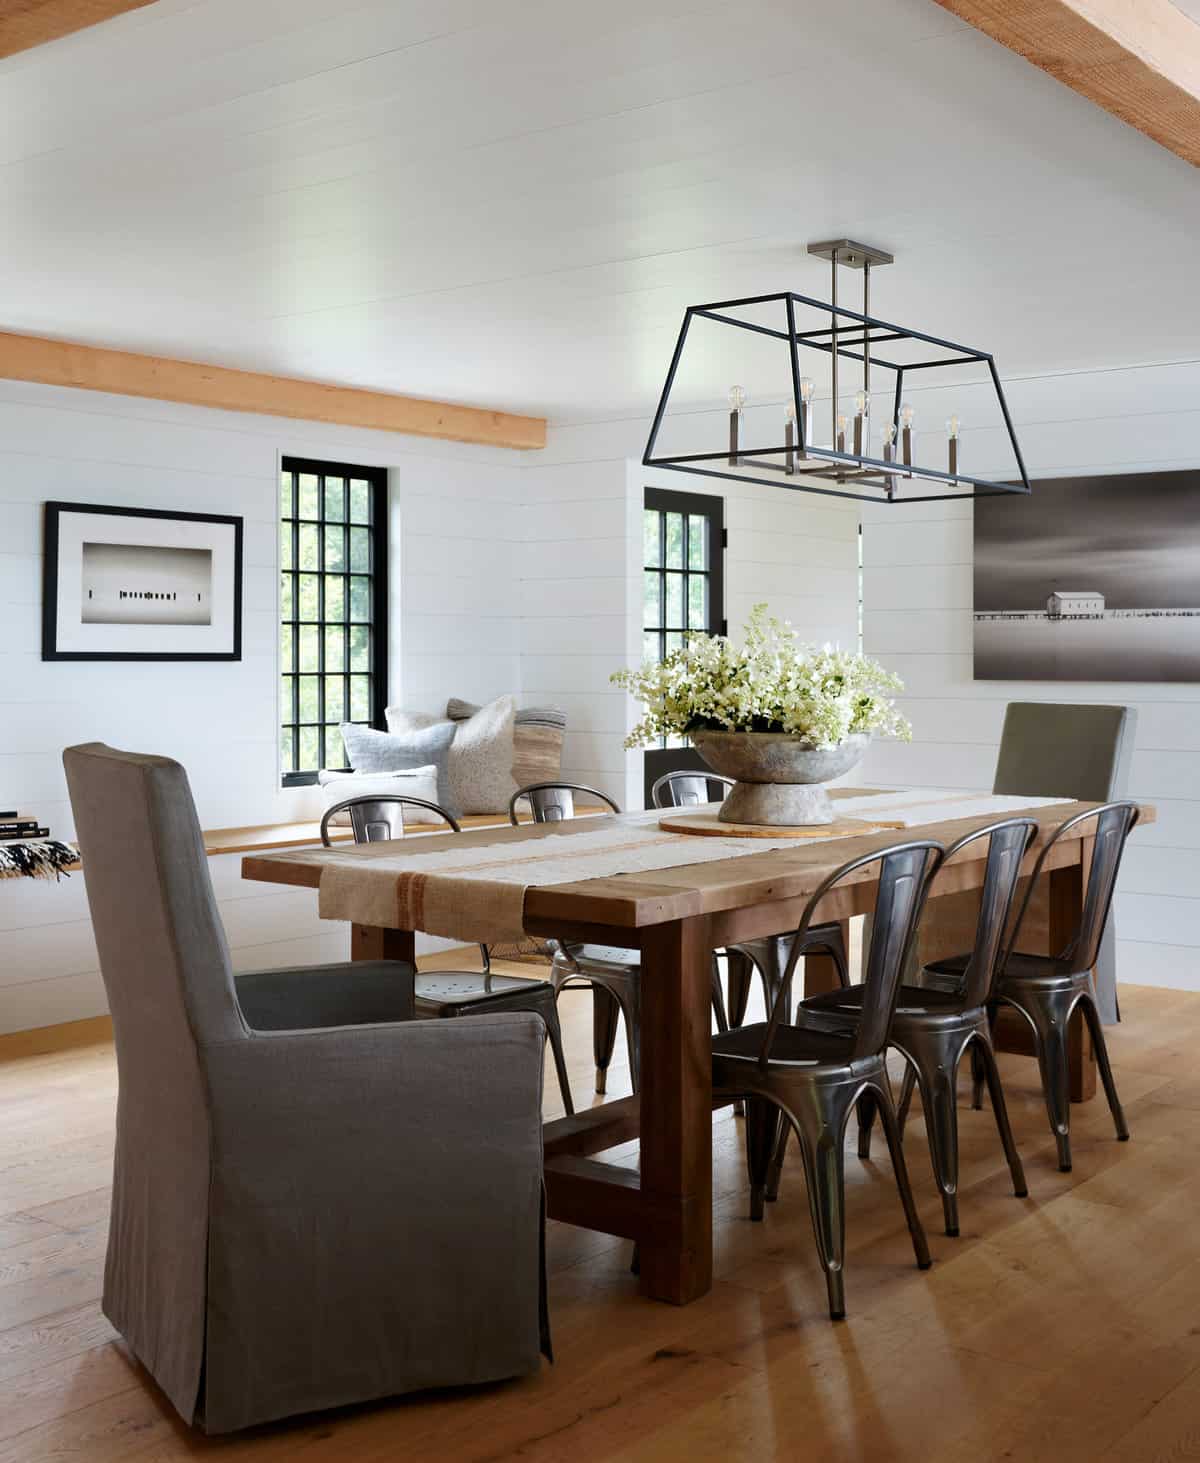 18-Dining-Room-AFTER. An inviting bench under the windows fills previously unused space, while creating storage and a seat with great views . Shiplap walls throughout the house contribute to the modern rustic feeling. Floors are engineered wide plank French Oak.